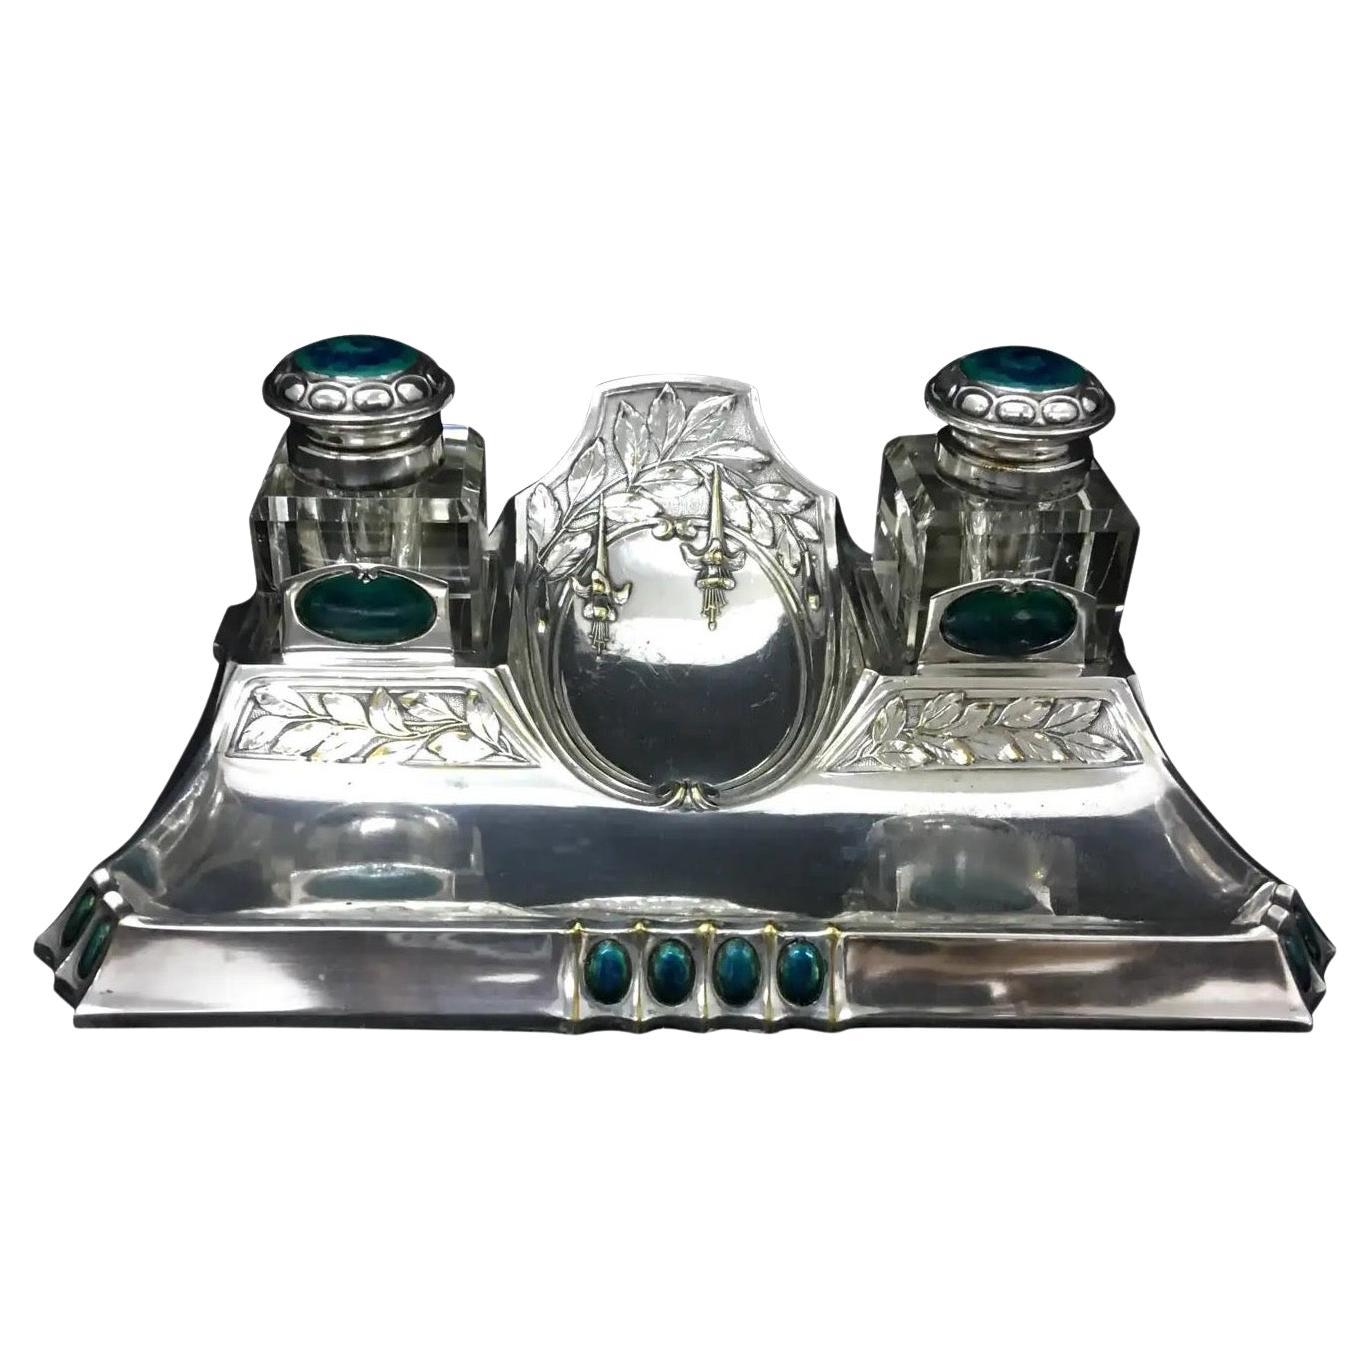 1900, High Quality Art Nouveau Silver Plated and Enamels German Inkwell For Sale